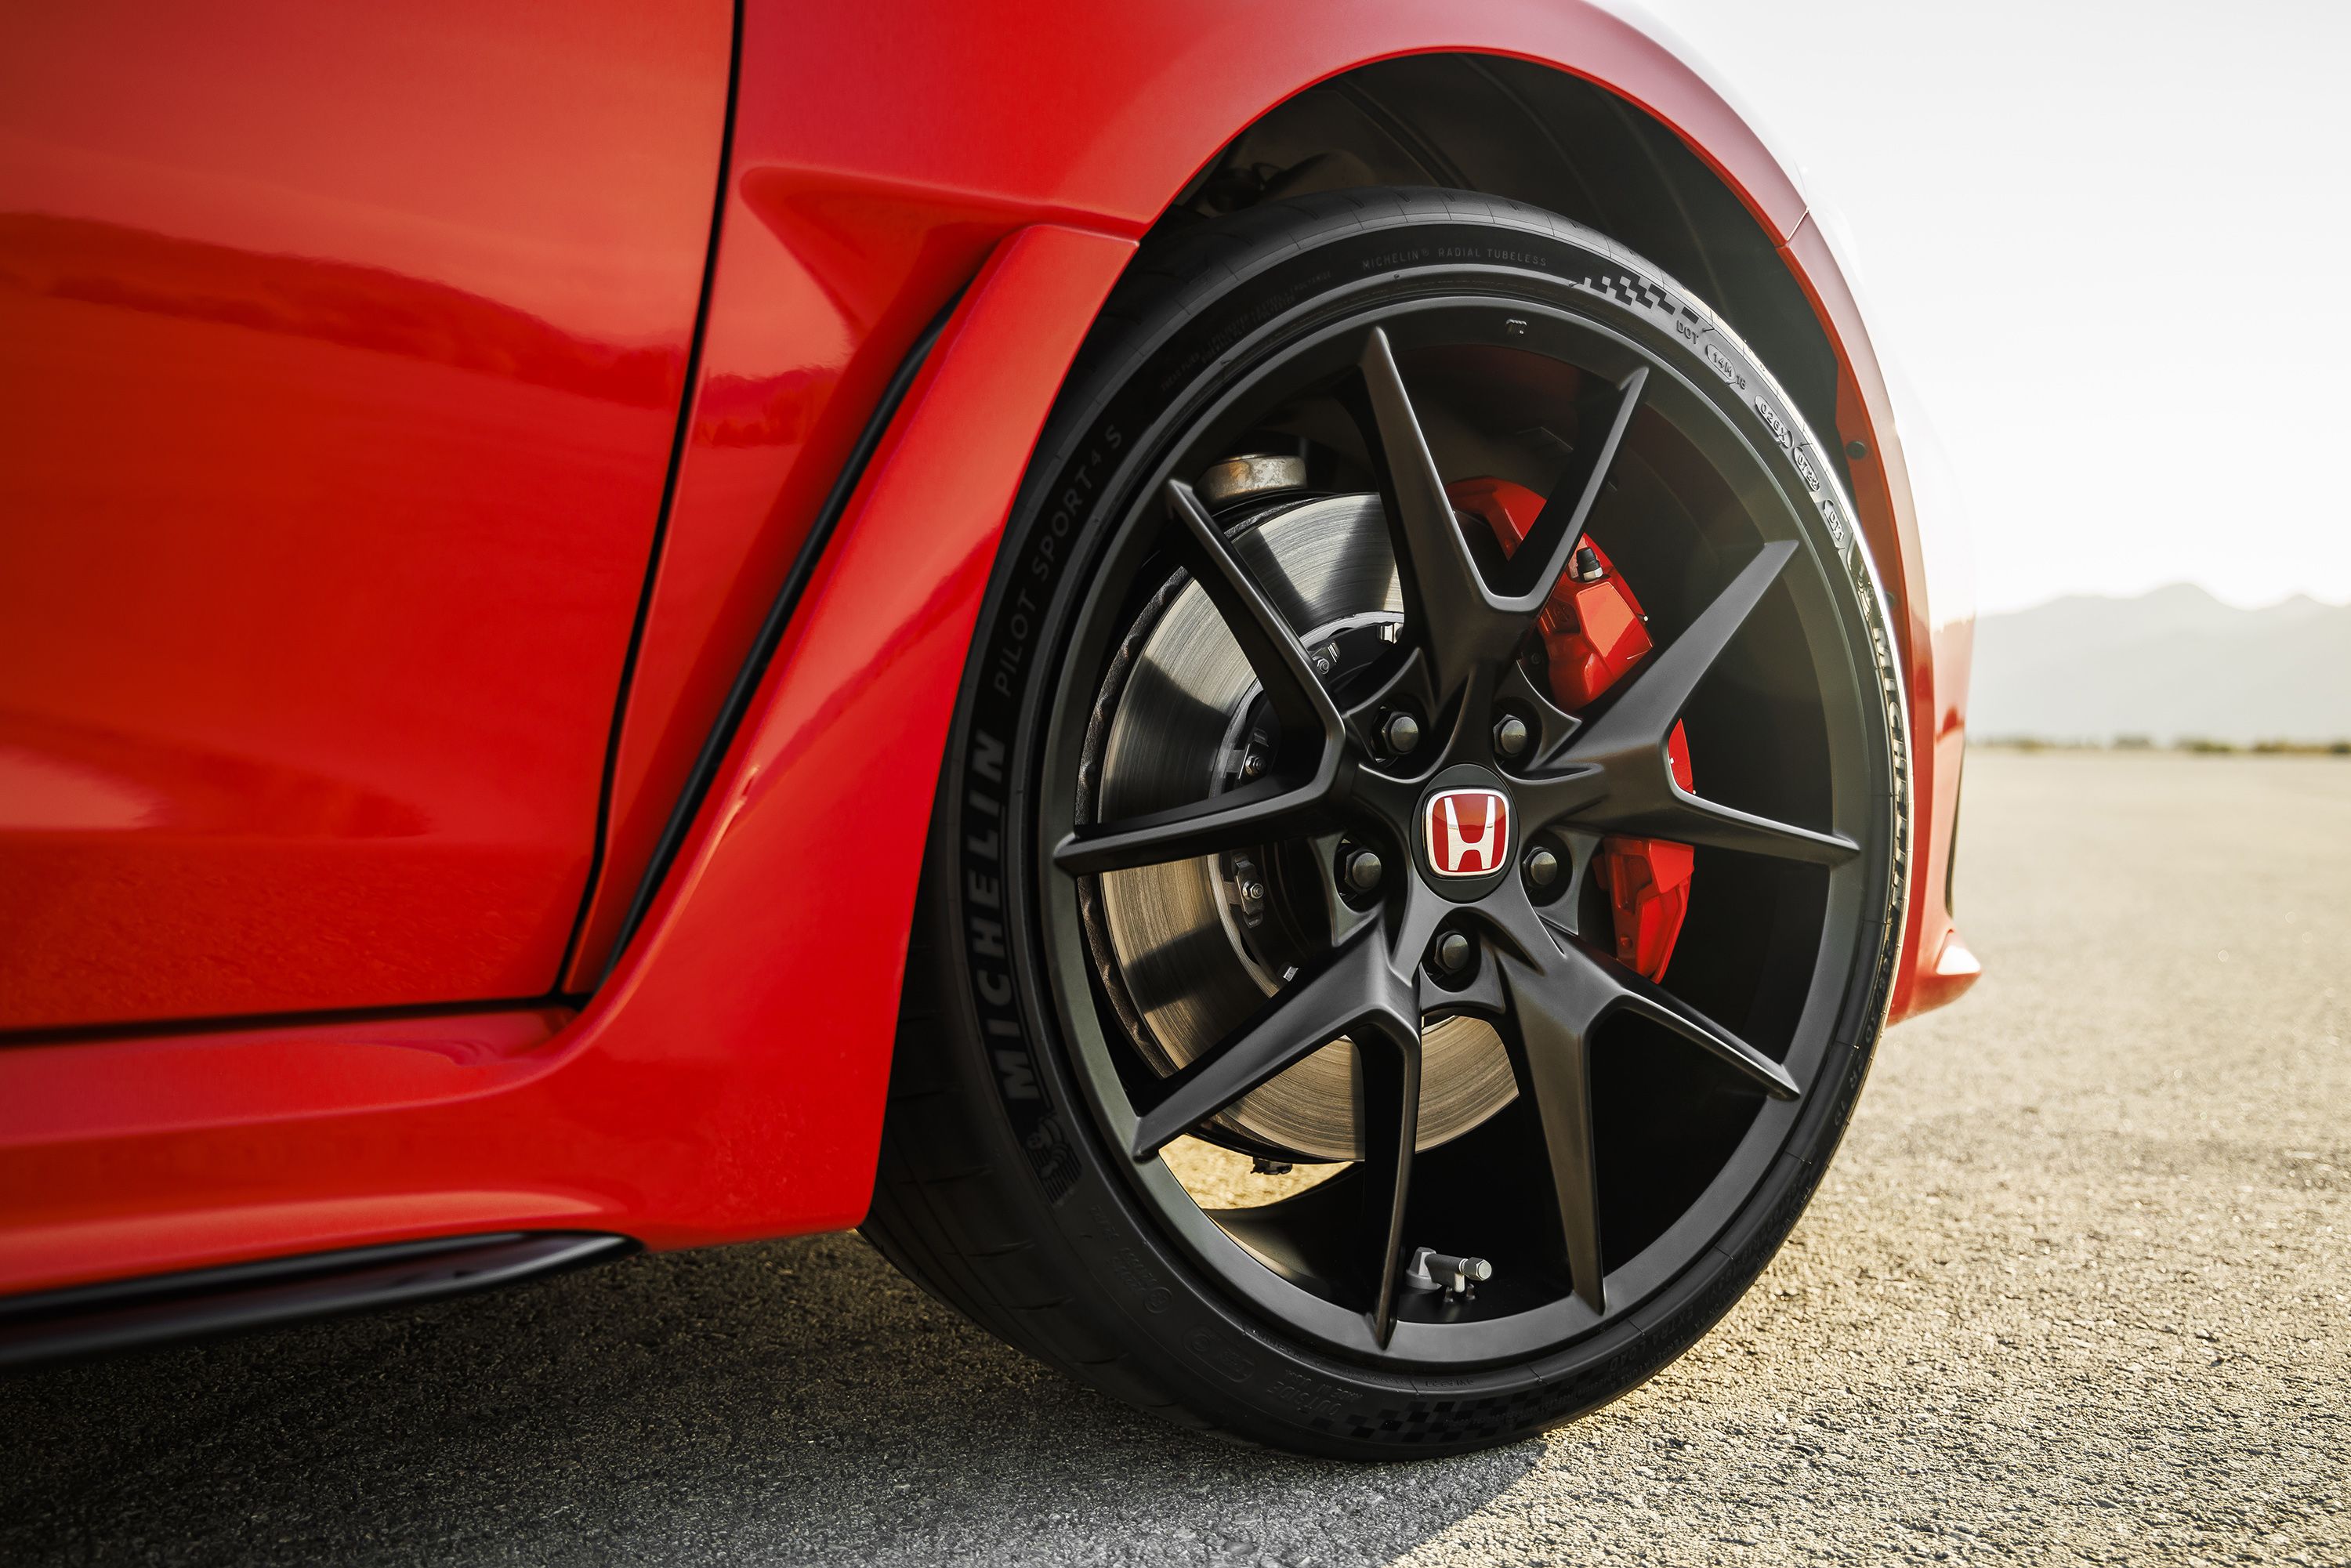 2023 Honda Civic Type R Good For 326 HP But Gains 88 Lbs